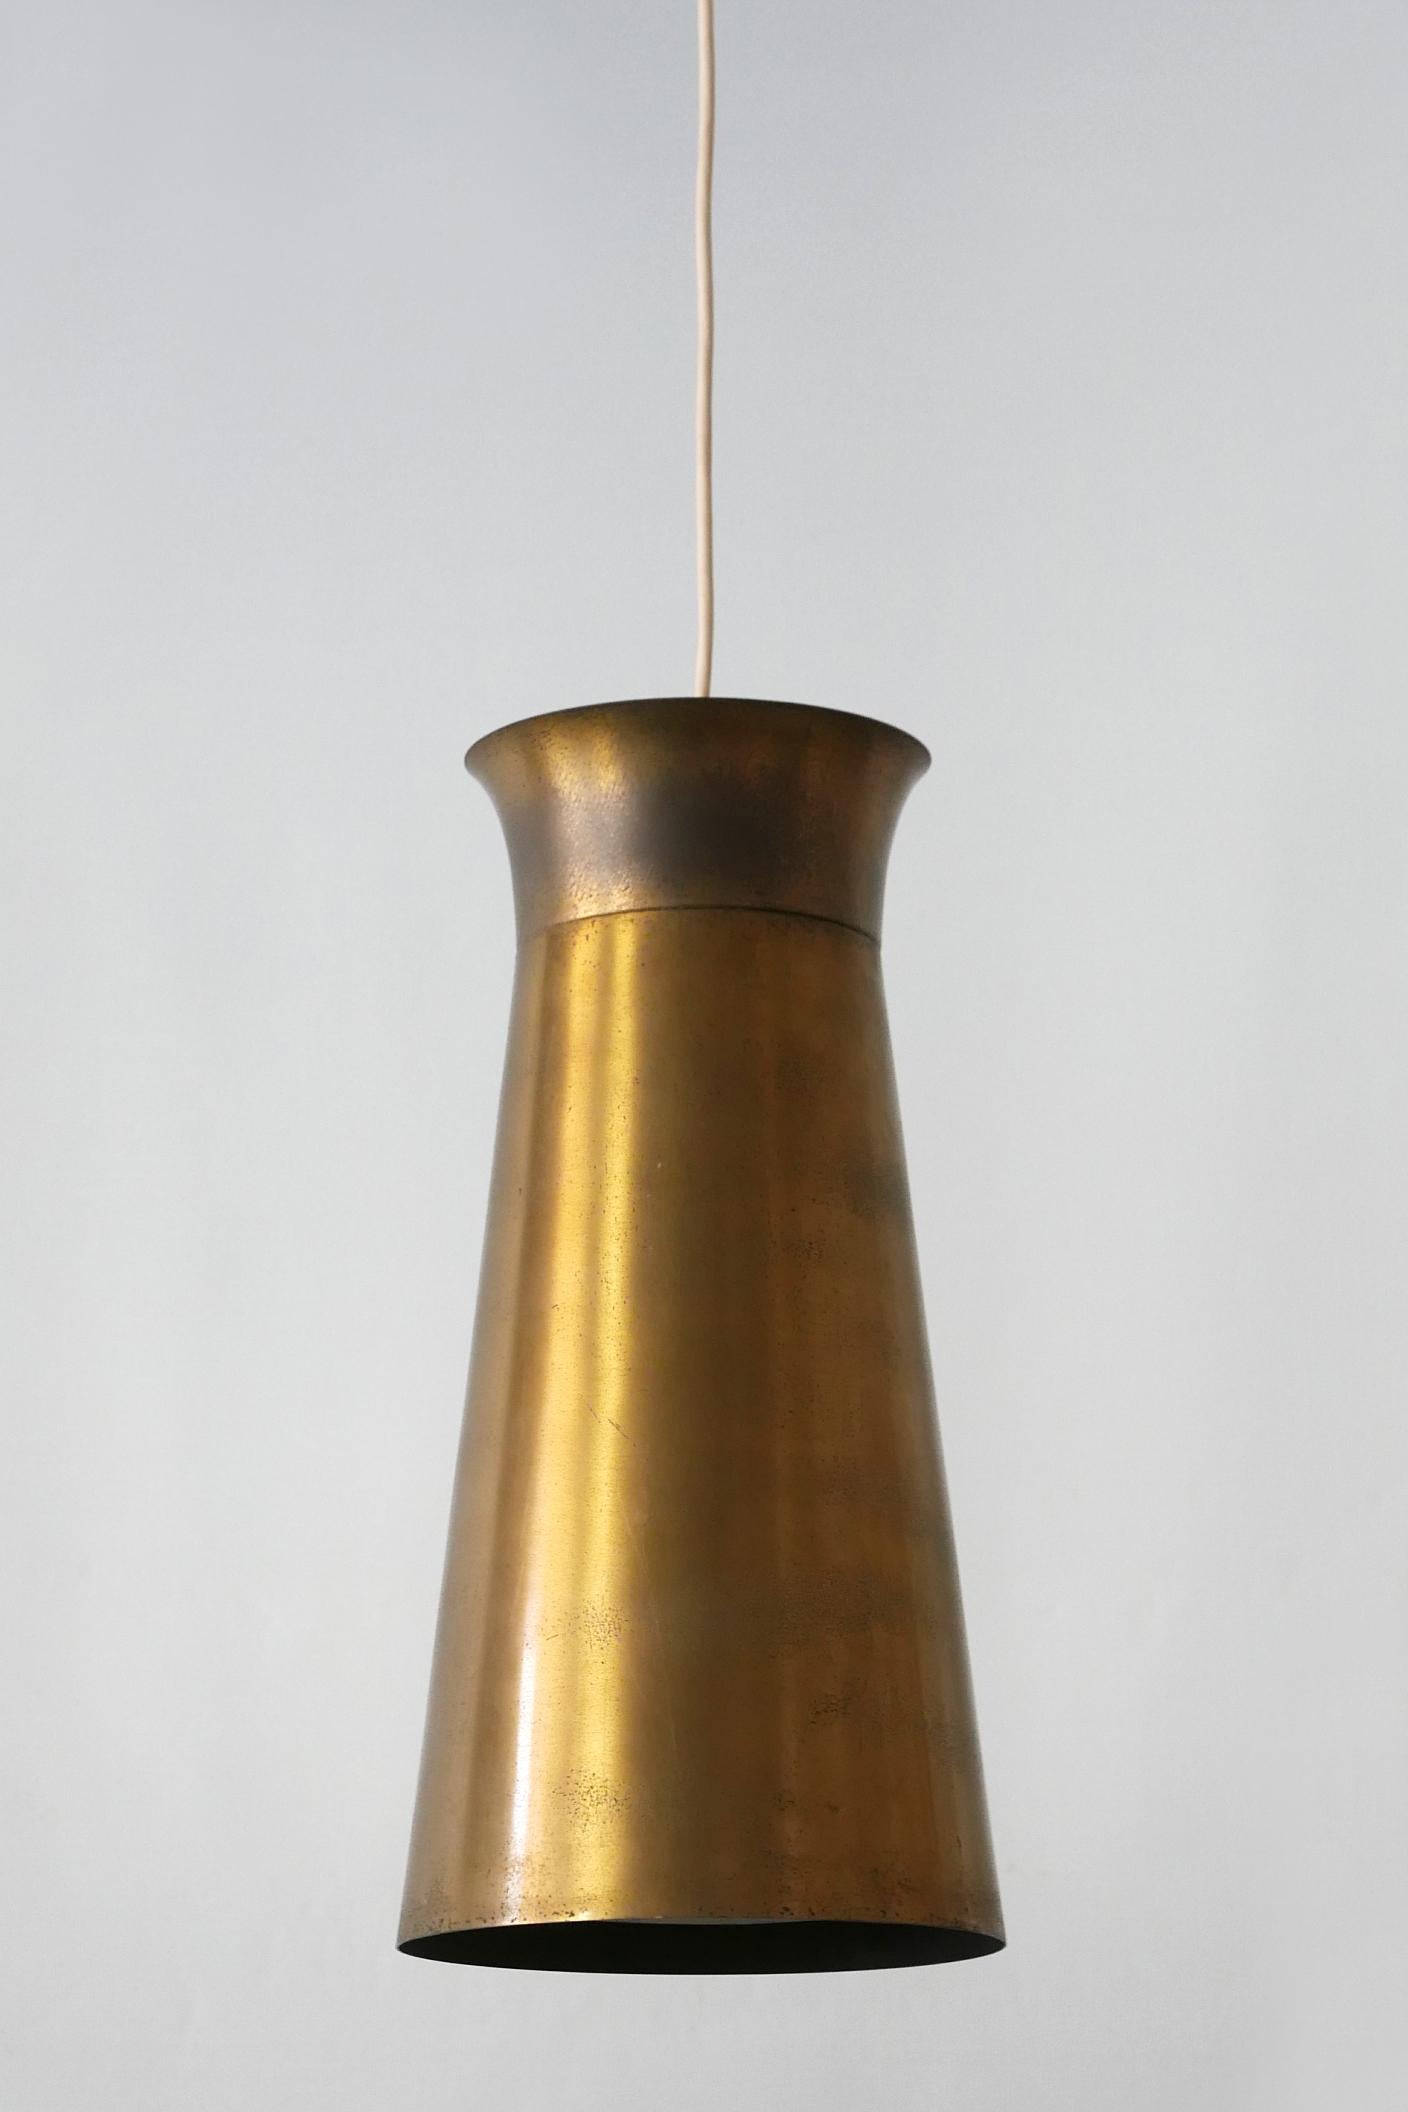 Elegant Mid-Century Modern Brass Pendant Lamps or Hanging Lights, 1950s, Germany For Sale 9